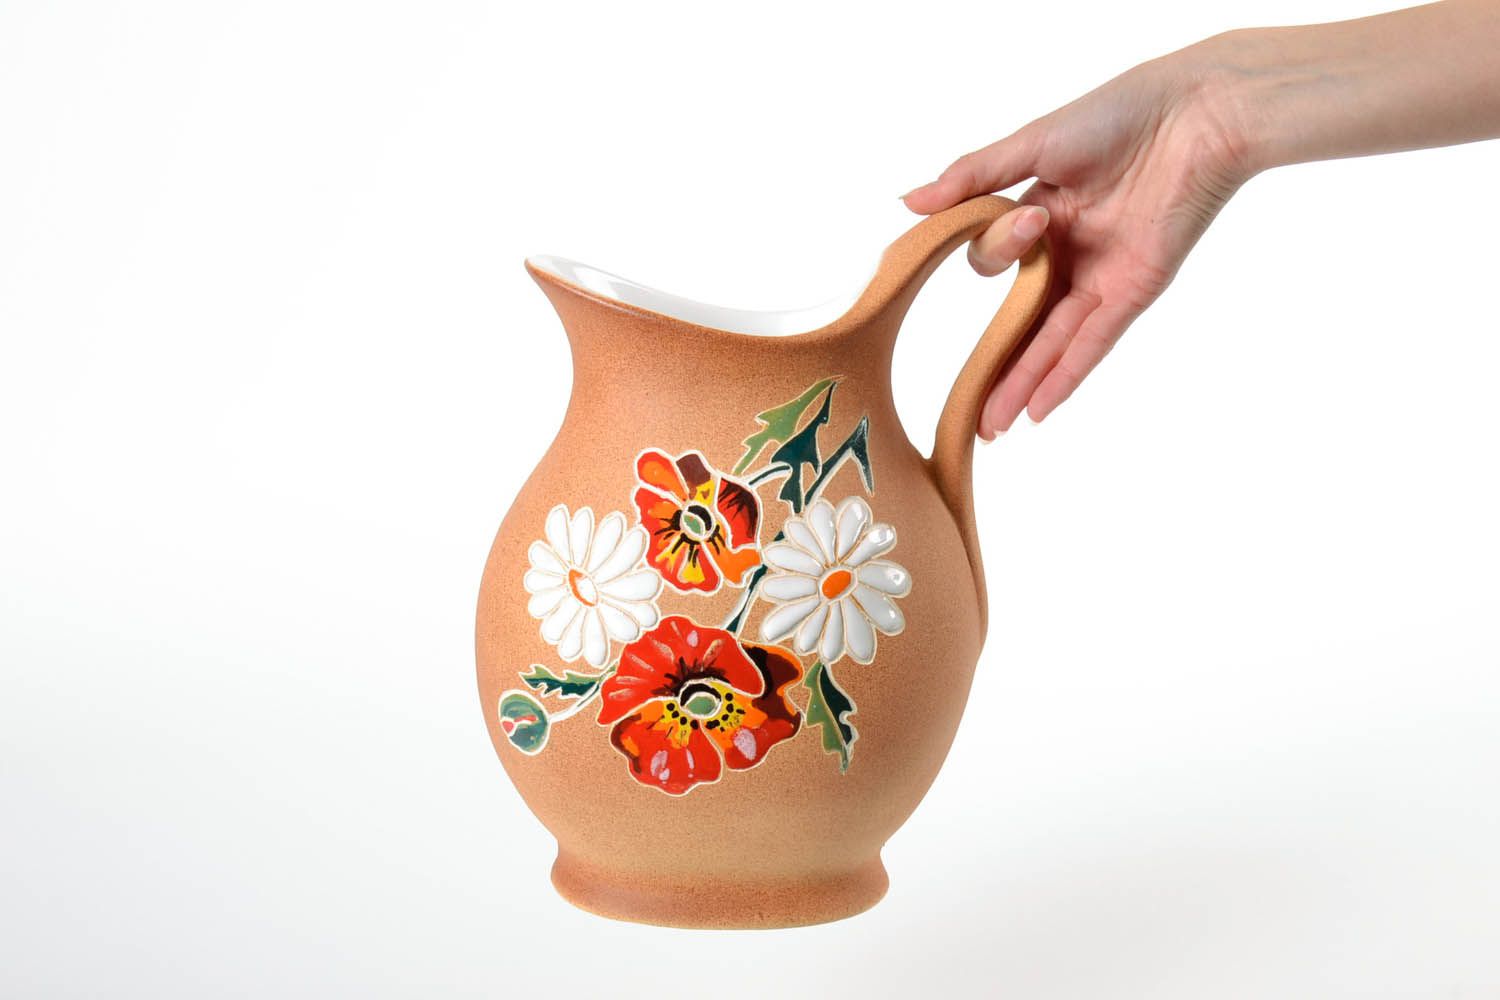 100 oz 11 inches floral design ceramic water pitcher with handle 3,5 lb photo 2